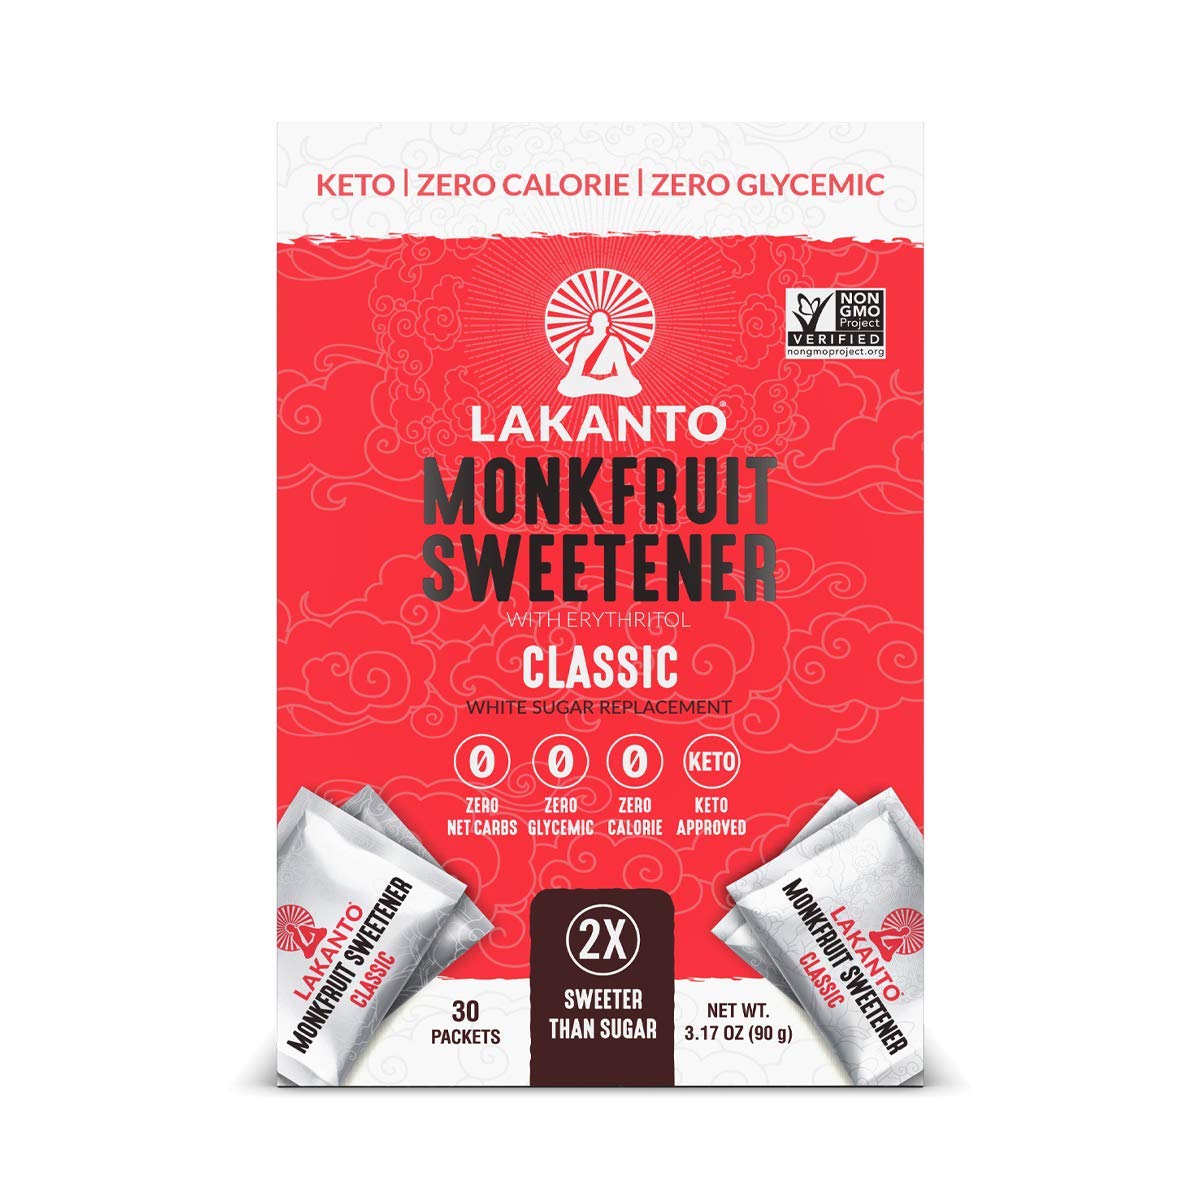 Lakanto Classic Monk Fruit Sweetener with Erythritol Packets - White Sugar Replacement, Zero Net Carbs, Zero Calorie, Sweeten on the Go, Coffee, Lemonade, Tea, Desserts - Classic (30 Count)